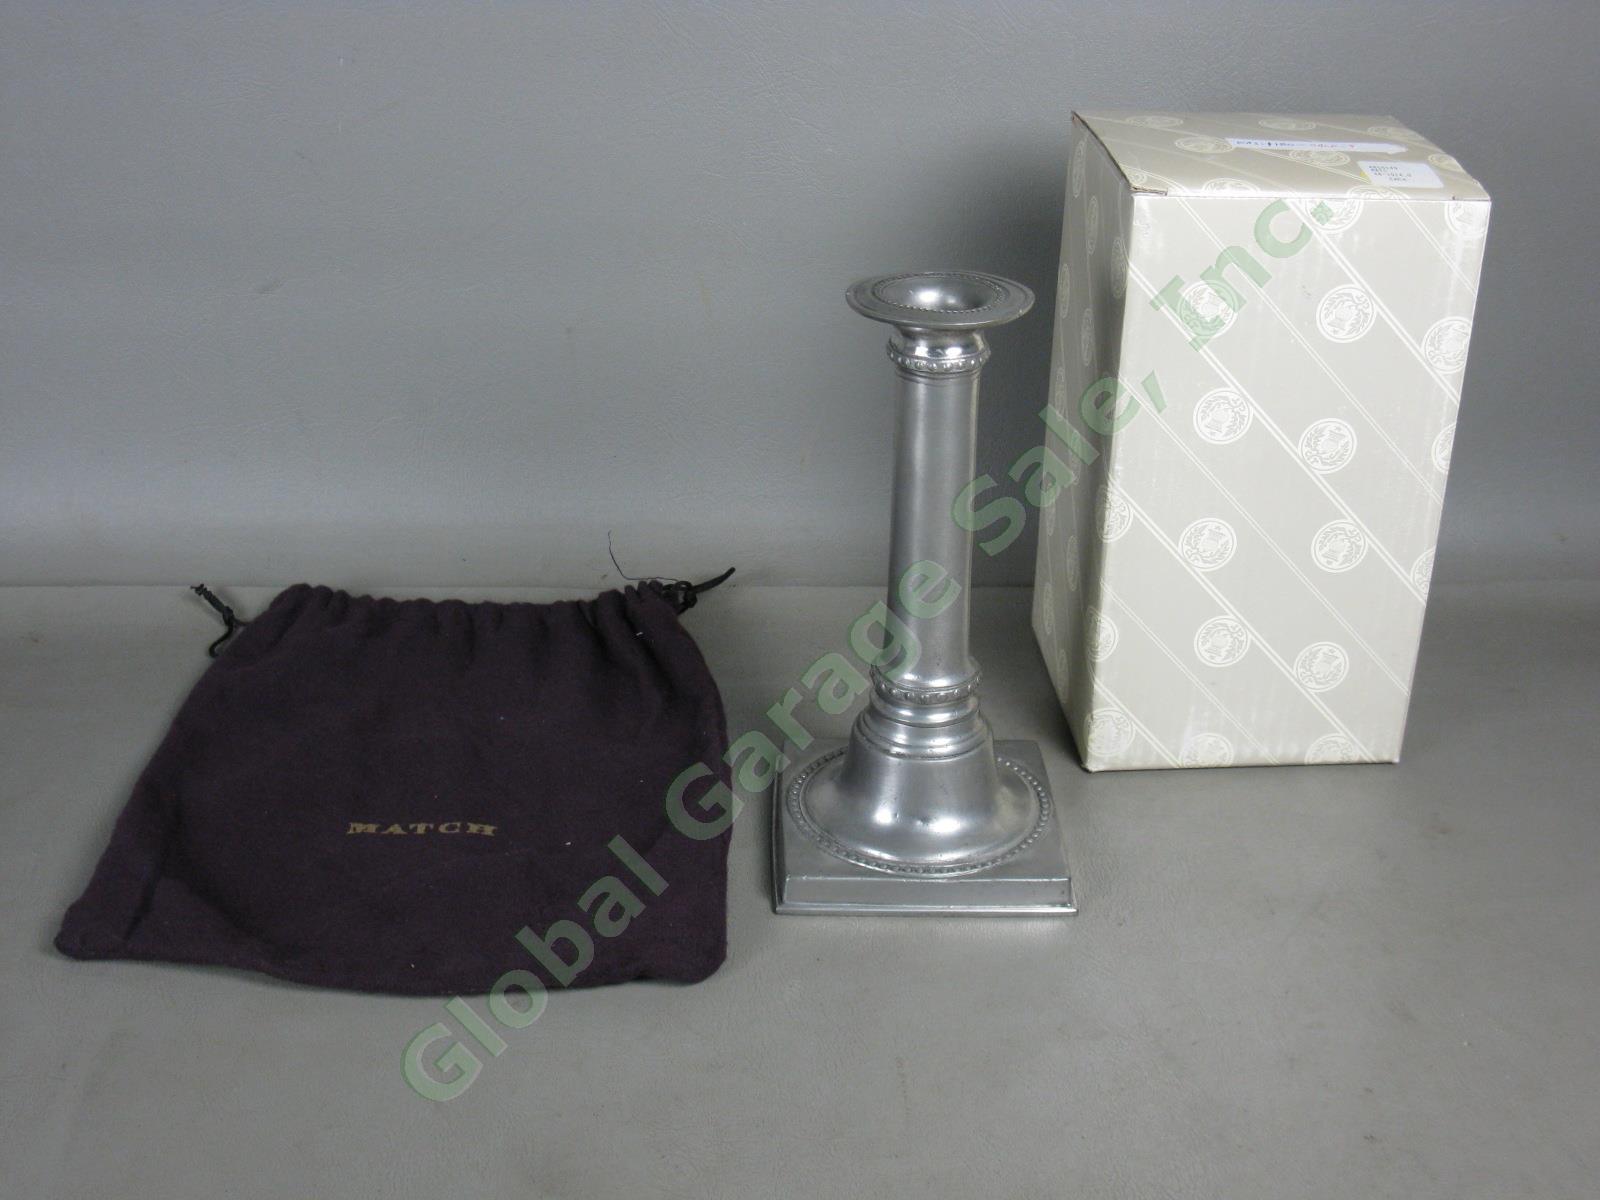 NEW Match Pewter Square Base 8" Candlestick Candle Holder Made In Italy $200 NR!